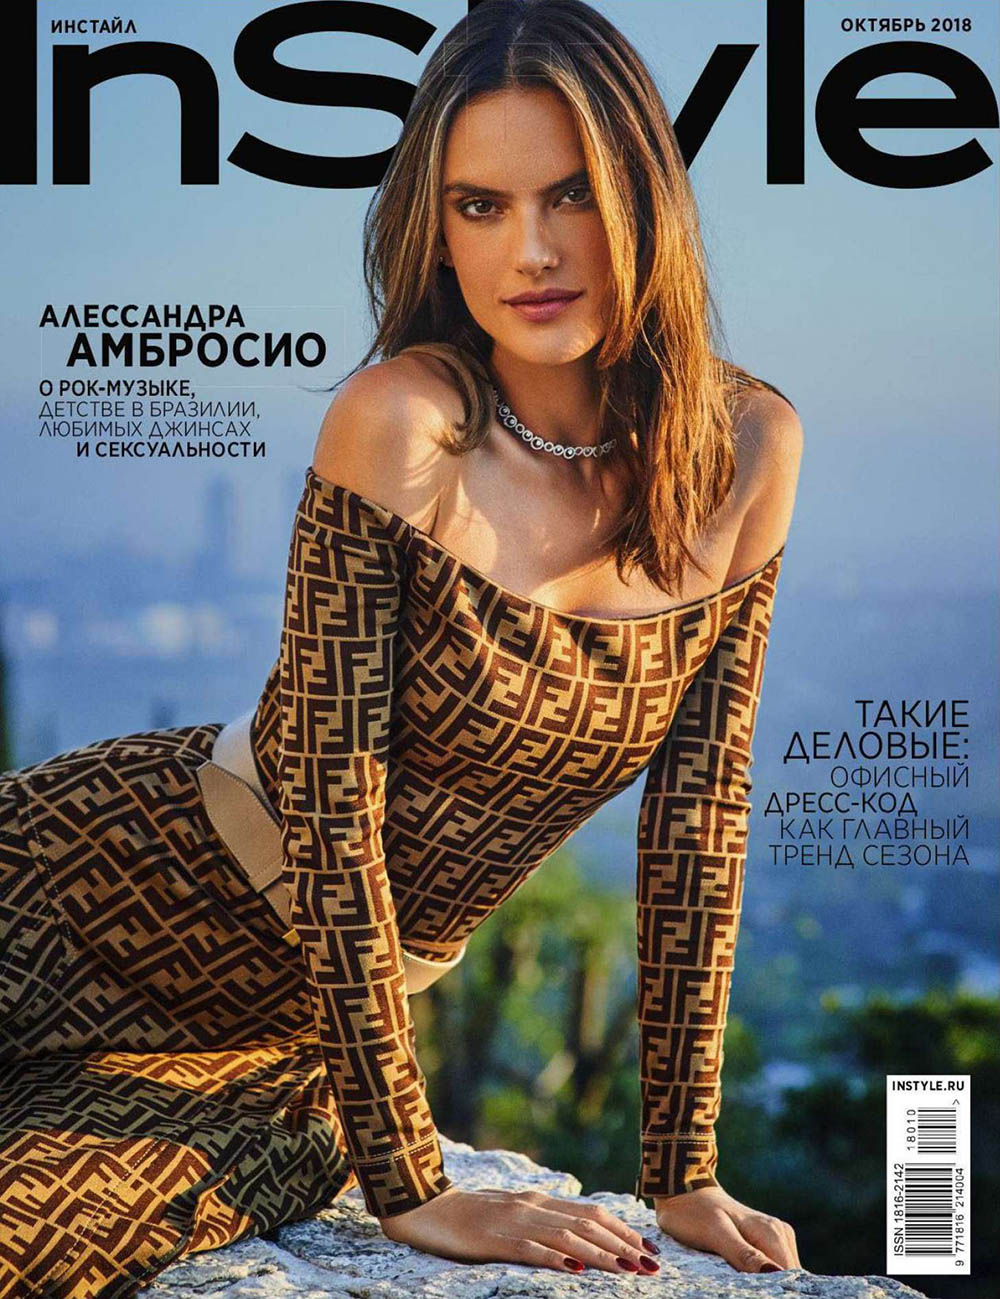 Alessandra Ambrosio covers InStyle Russia October 2018 by Stewart Shining